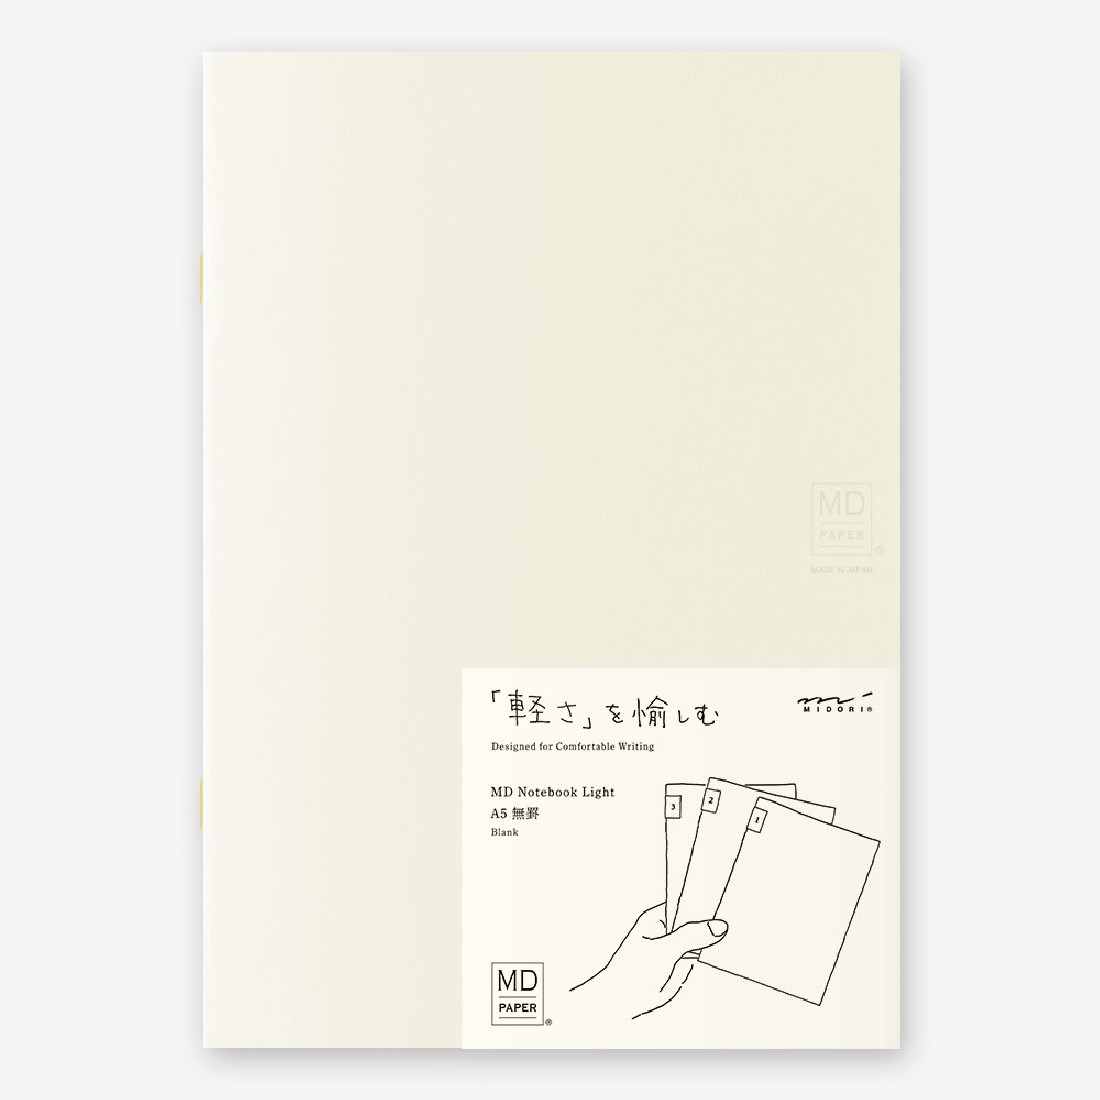 Midori MD Notebook Light A5 210 x148mm, Blank, 3pcs pack, Label stickers, Saddle Stitched, 48 pages each, 15303006